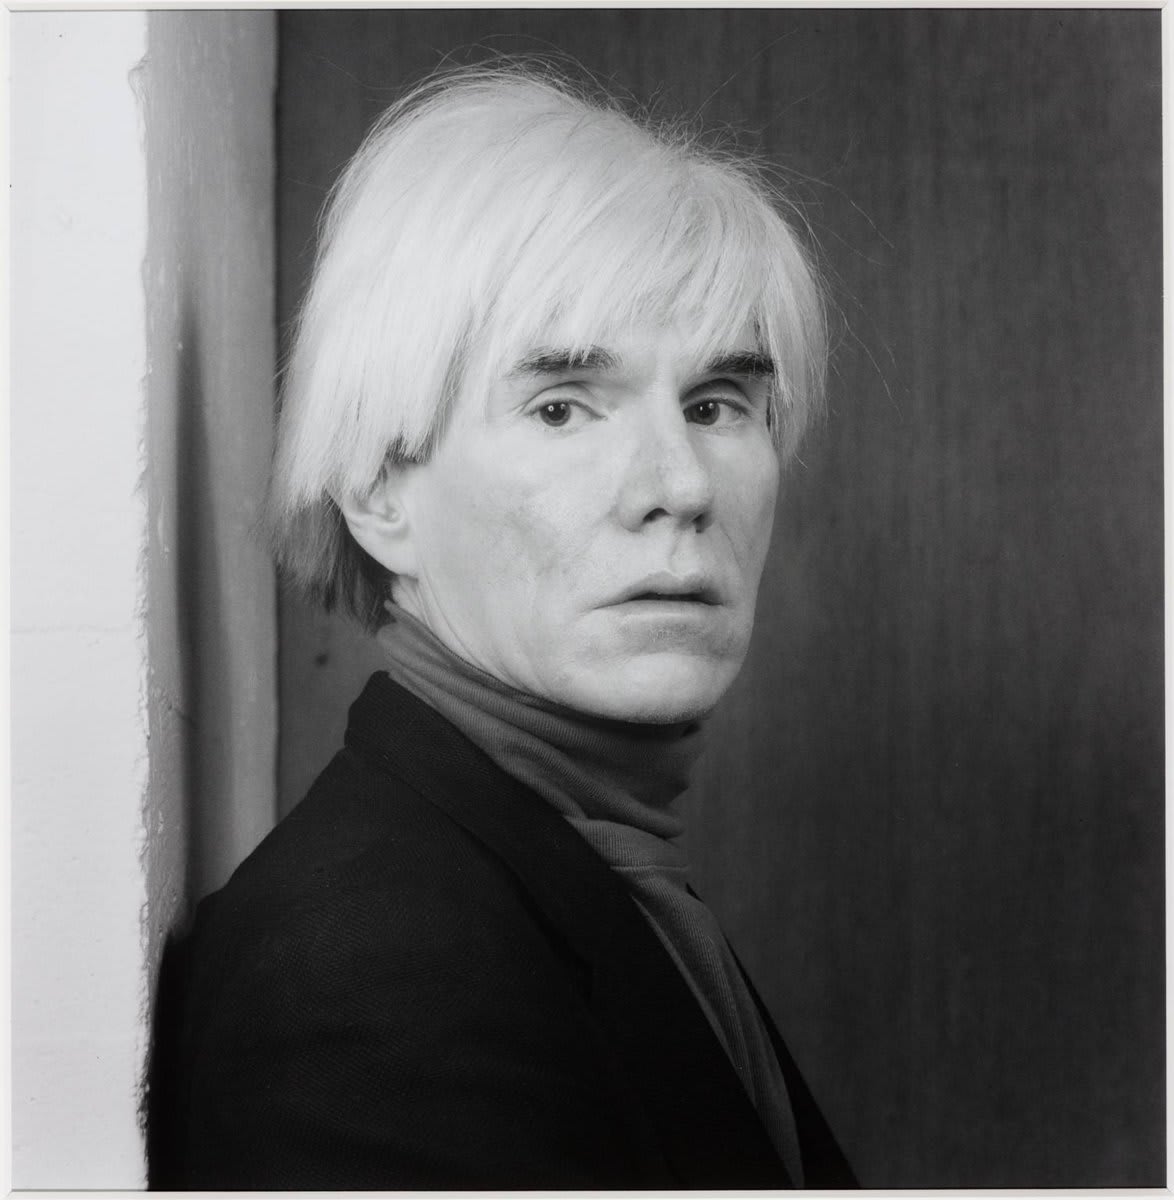 'Don't think about making art, just get it done. Let everyone else decide if it's good or bad, whether they love it or hate it. While they decide, make even more art.' - AndyWarhol Warhol died onthisday in 1987, age 58. This portrait was taken in 1983 by Robert Mapplethorpe.